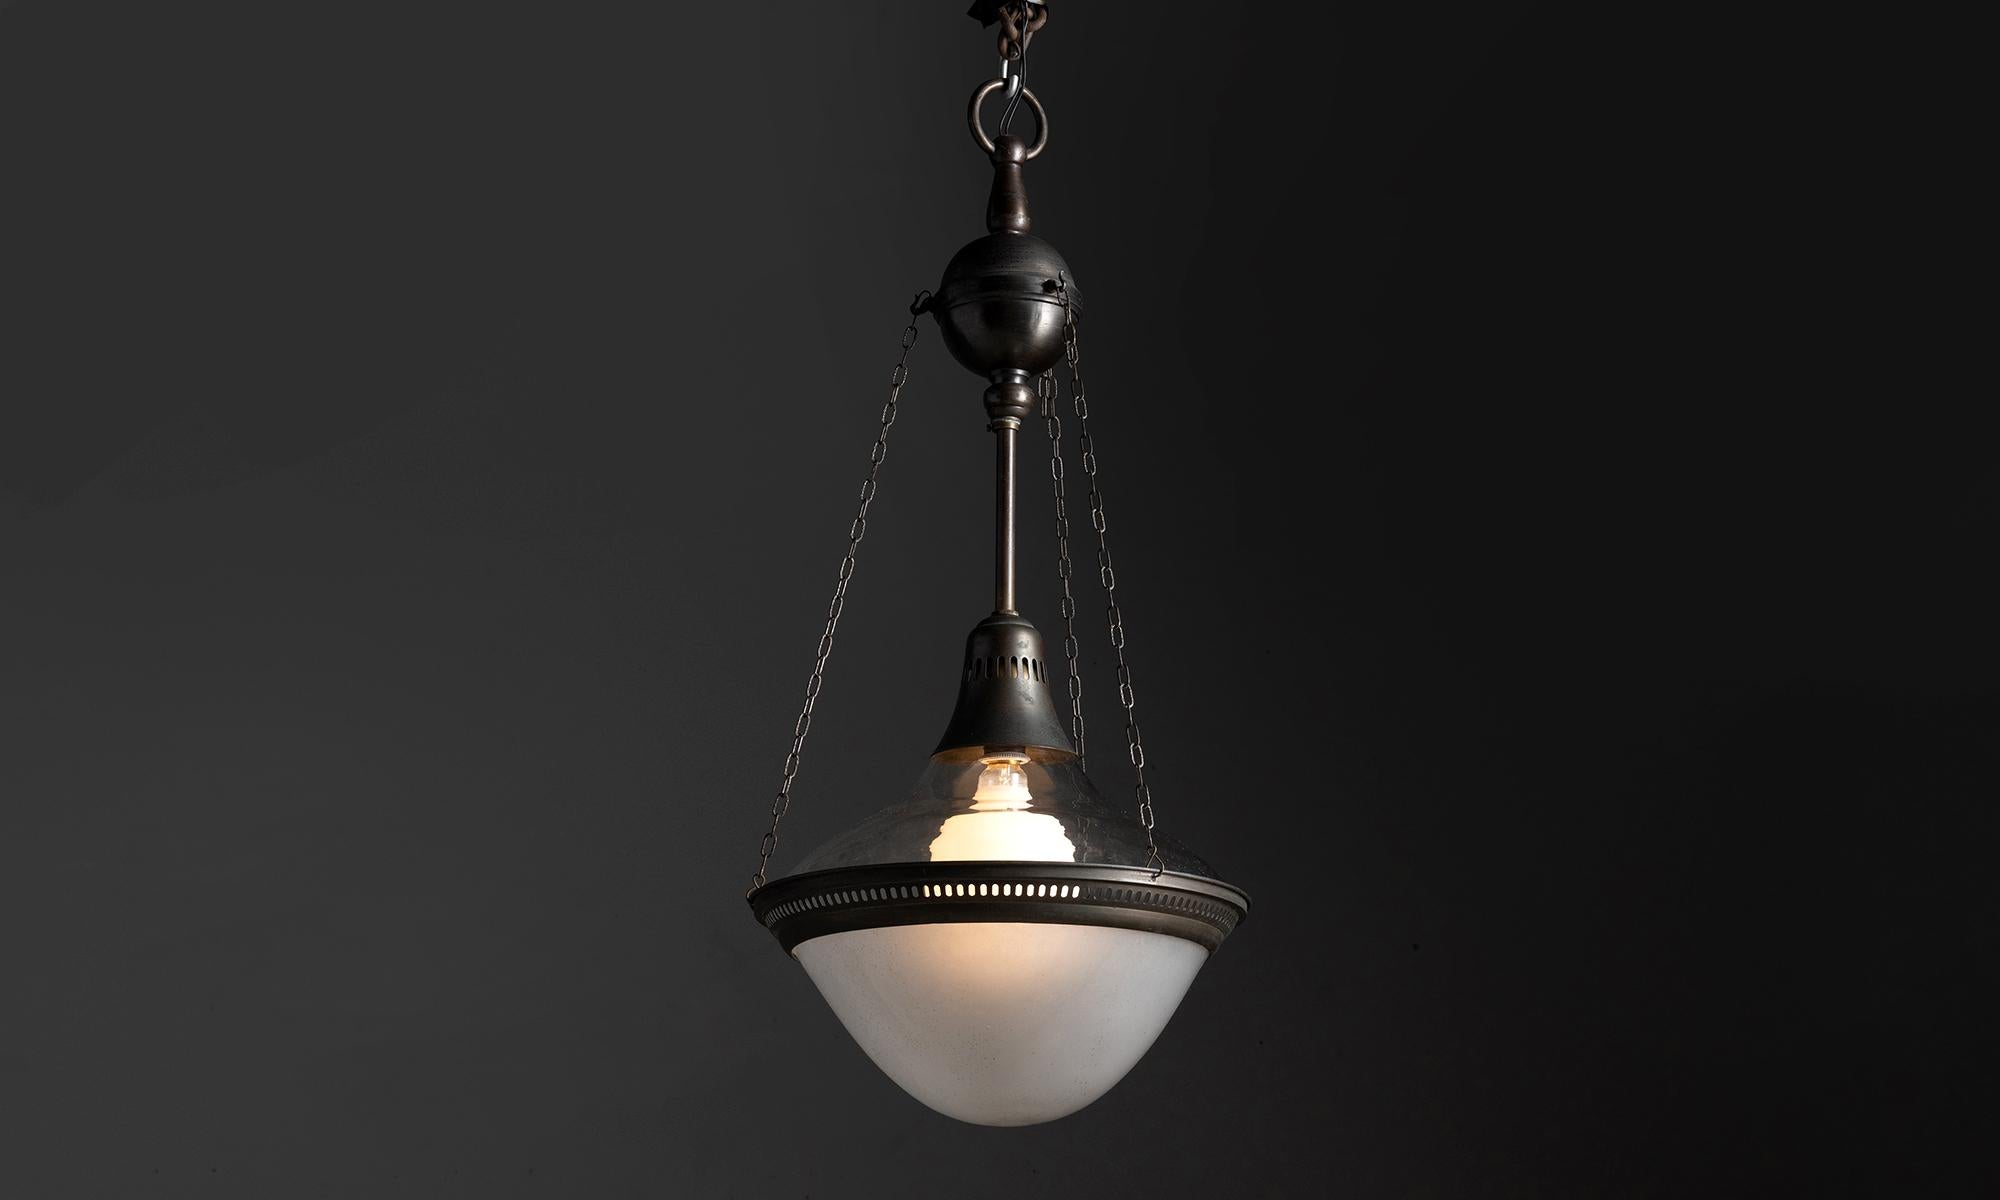 Two part AEG pendant with brass finish

Germany, circa 1910

Clear glass upper shade with opaline glass lower shade and original metal hardware.

Measures: 16” diameter x 32” height ( overall ).